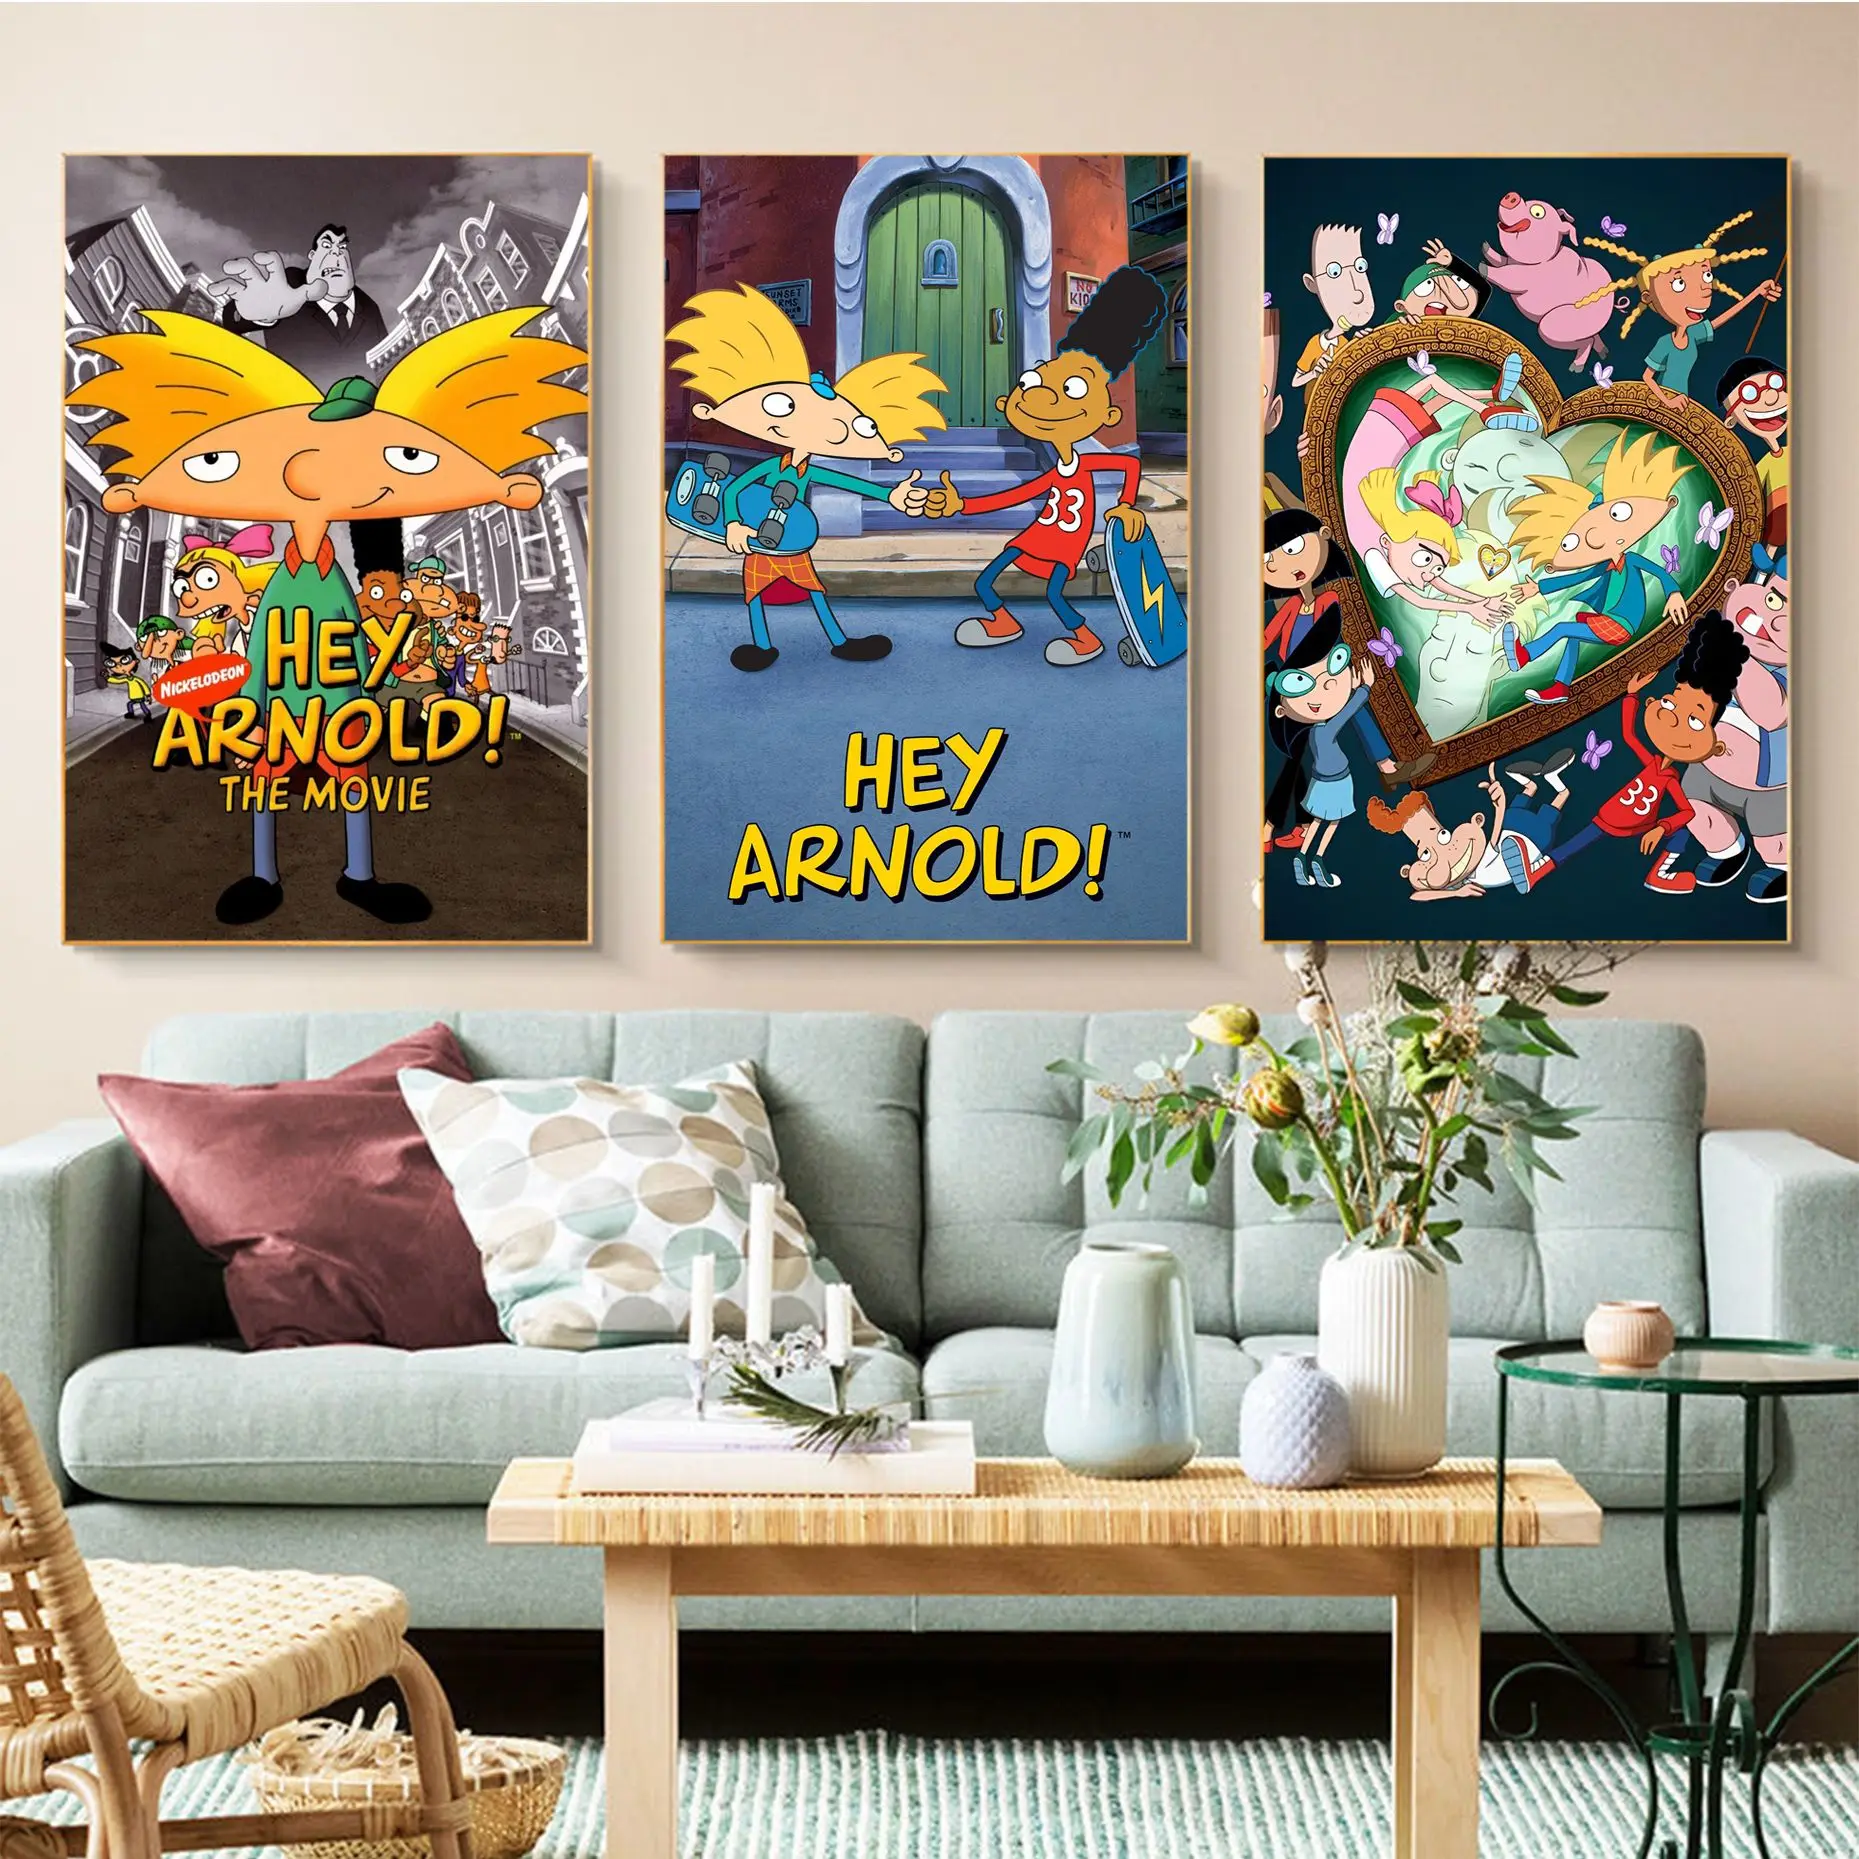 

Hey Arnold Vintage Posters Sticky Fancy Wall Sticker for Living Room Bar Decoration Posters Wall Stickers